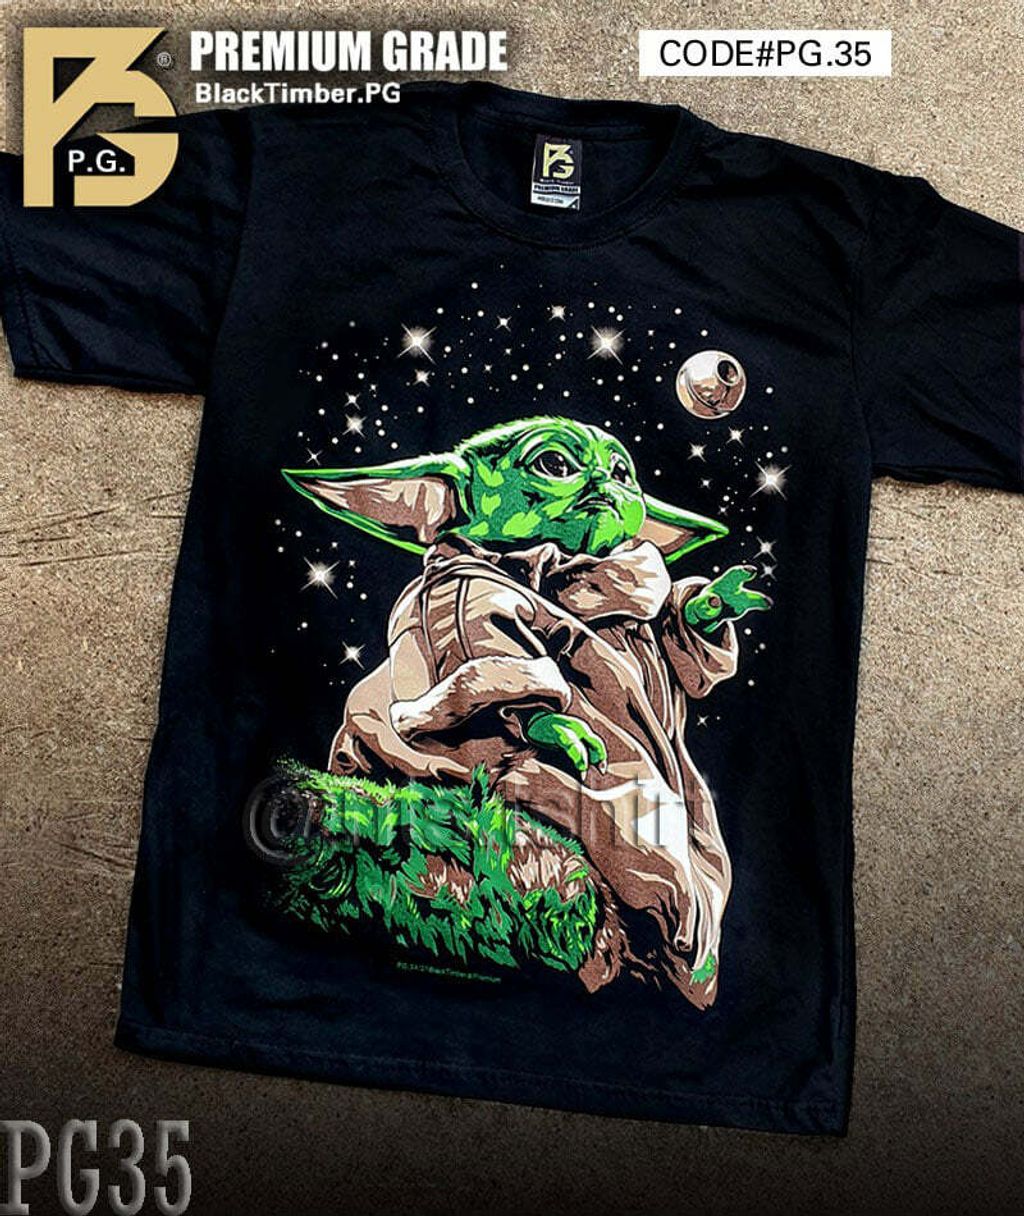 PG35 STAR WARS BABY YODA MANDALORIAN SPECIAL MOVIE COLLECTION ORIGINAL  PREMIUM GRADE BLACK TIMBER COTTON T-SHIRT – PREMIUM GRADE BLACK TIMBER NEW  TYPE SYSTEM MOAI SPEED HIGH QUALITY SILK SCREEN COLLECTABLE T-SHIRT | T-Shirts